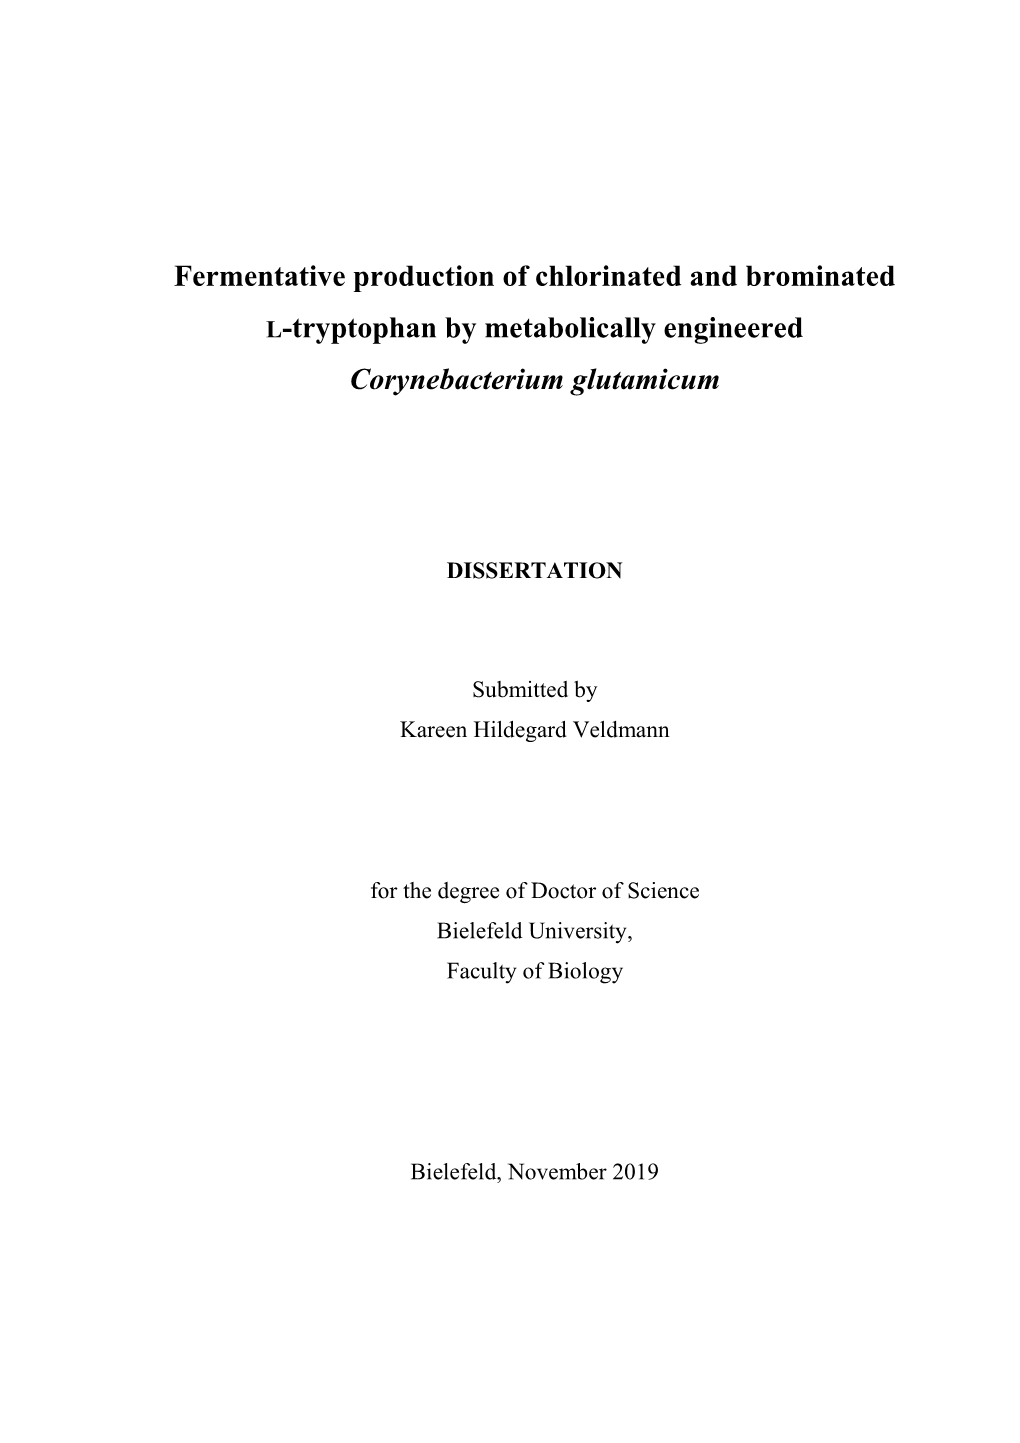 Fermentative Production of Chlorinated and Brominated